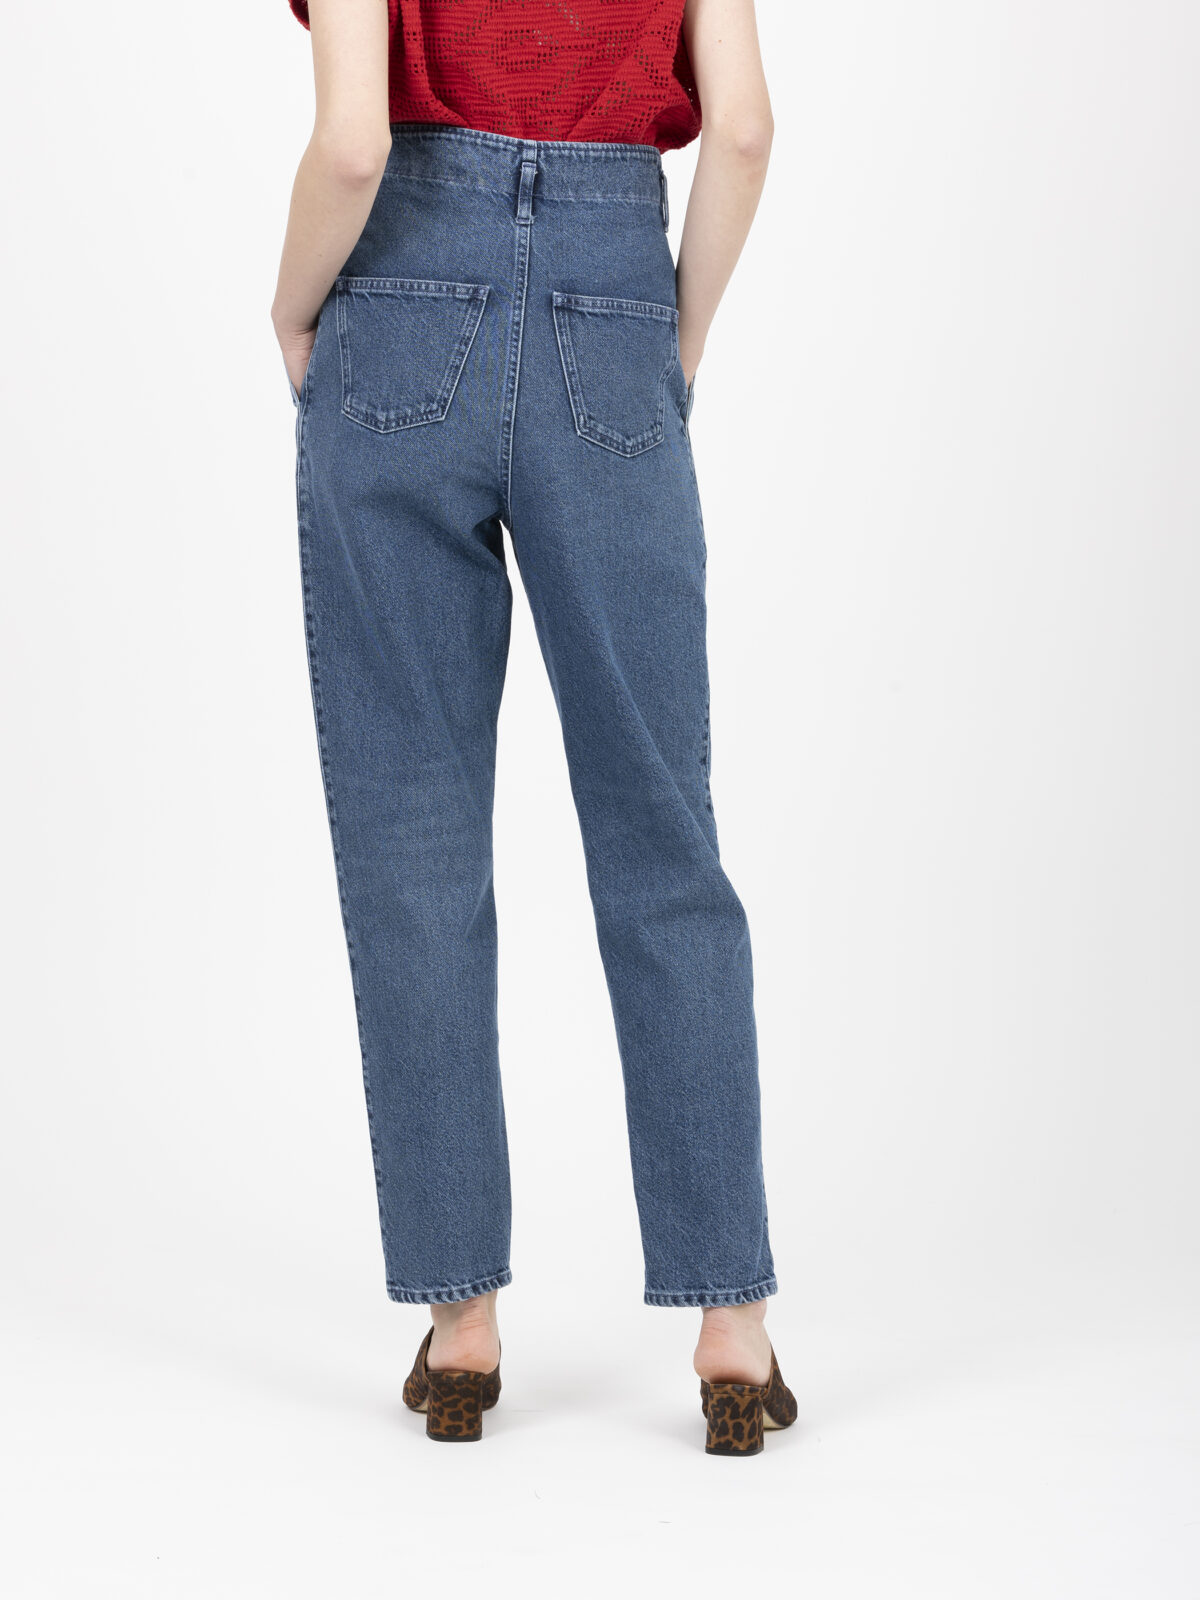 acady-belted-pleated-waist-denim-jeans-carrot-fit-iro-matchboxathens